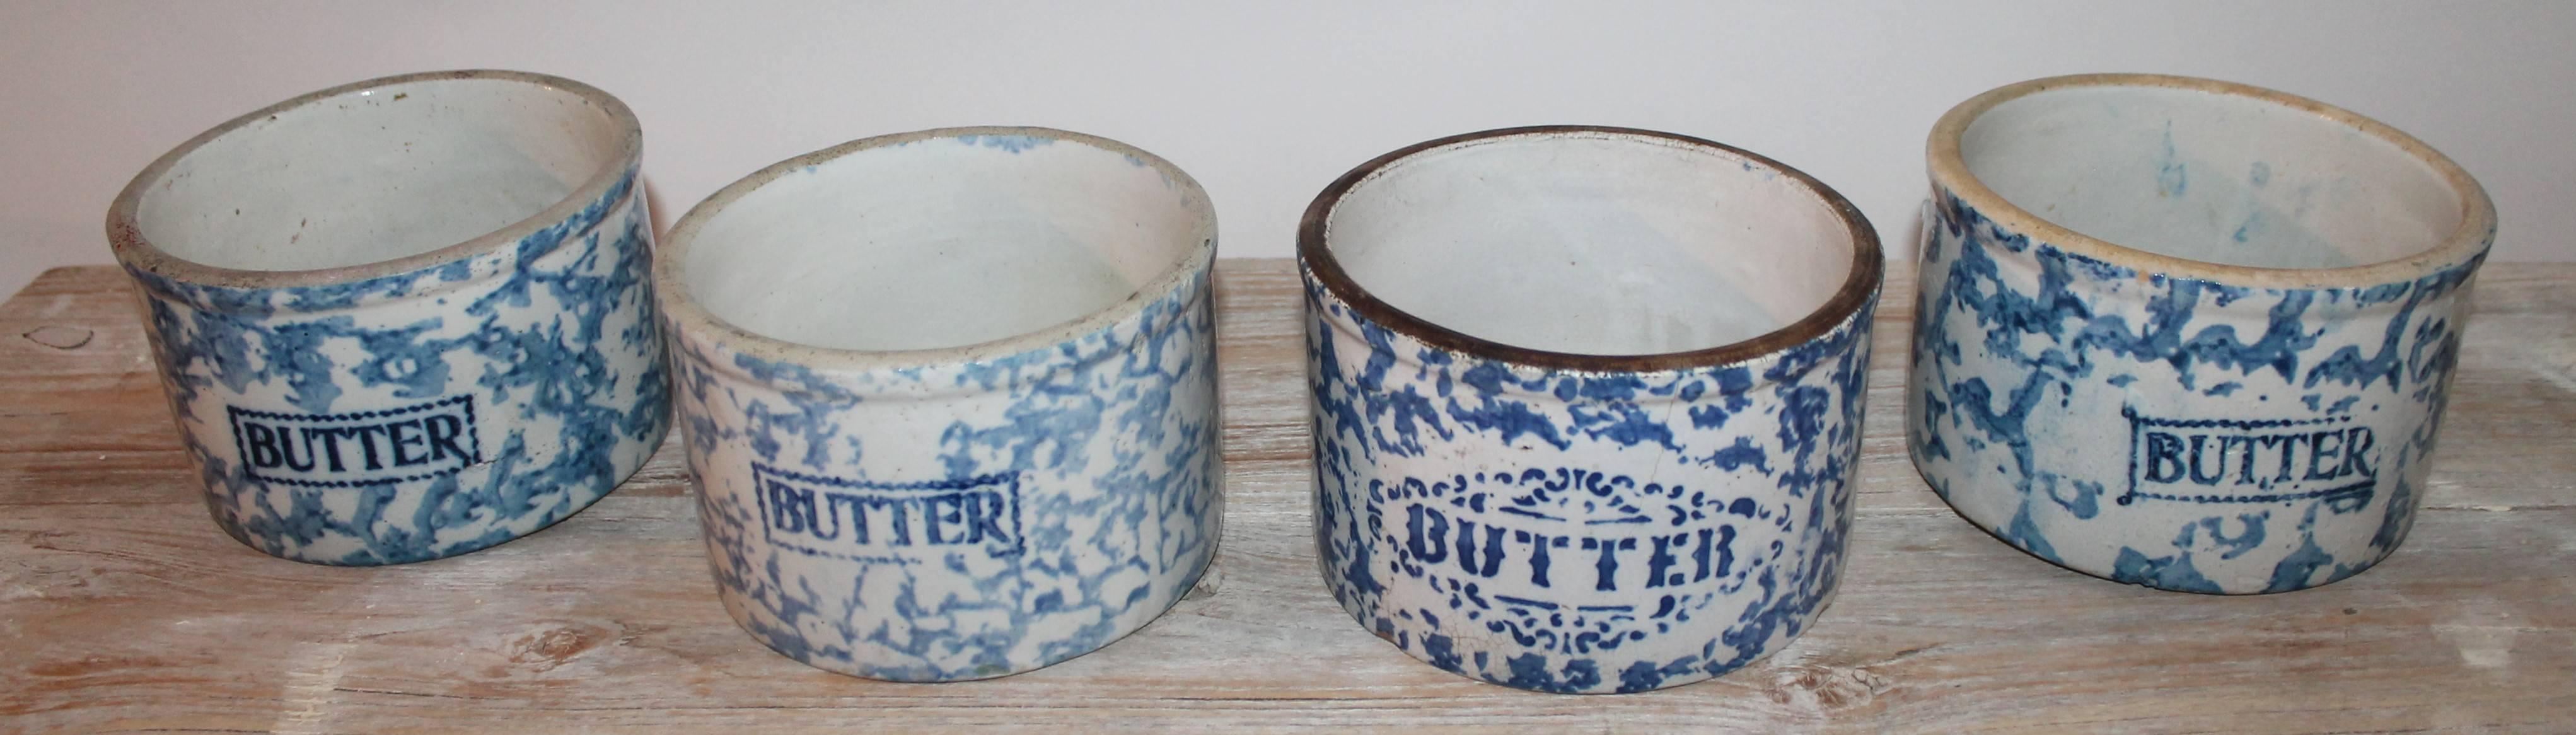 These 19th century sponge ware pottery butter crocks measures 6 x 4 and are all in good condition. Each one is slightly different from the next. So nice to see a grouping on a kitchen shelf or cupboard.